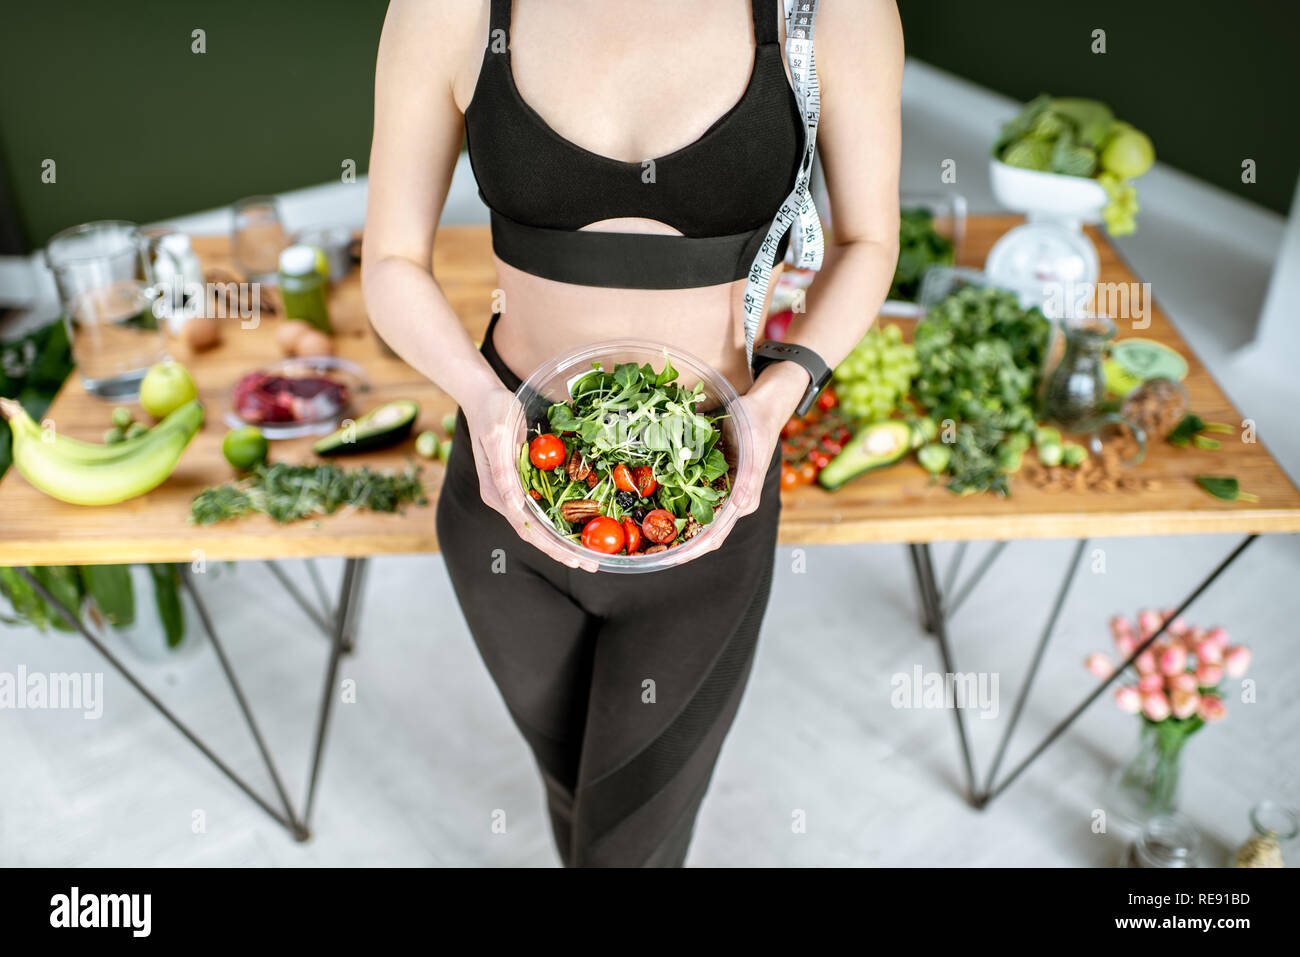 Athletic woman in sportswear holding salad near the table full of healthy products. Healthy eating and sports lifestyle concept Stock Photo